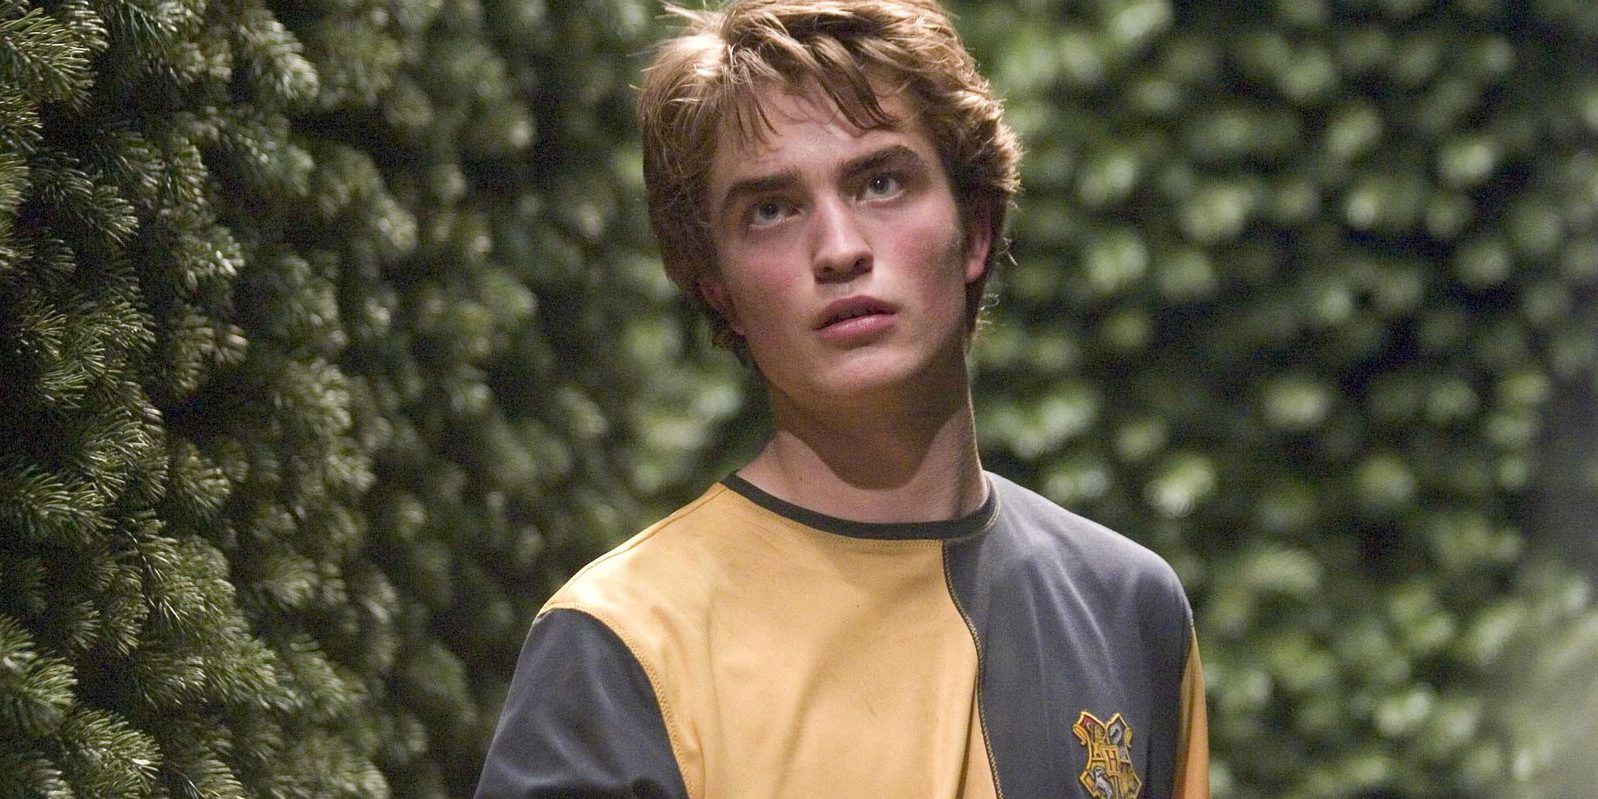 Cedric competing in the Goblet of Fire.